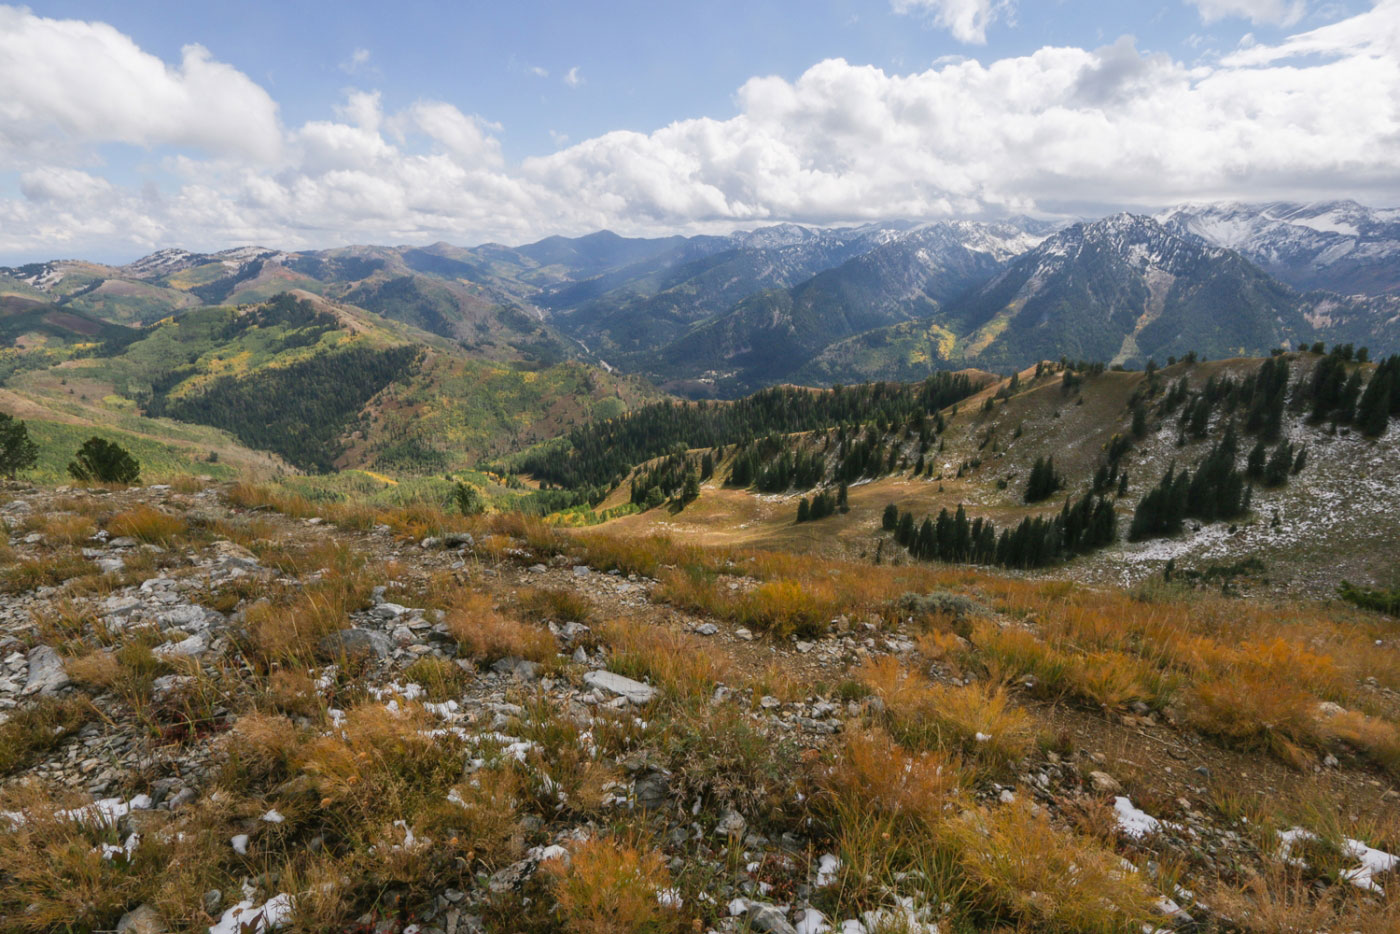 Hike Gobblers Knob and Mount Raymond via Alexander Basin in Wasatch-Cache National Forest, Utah - Stav is Lost